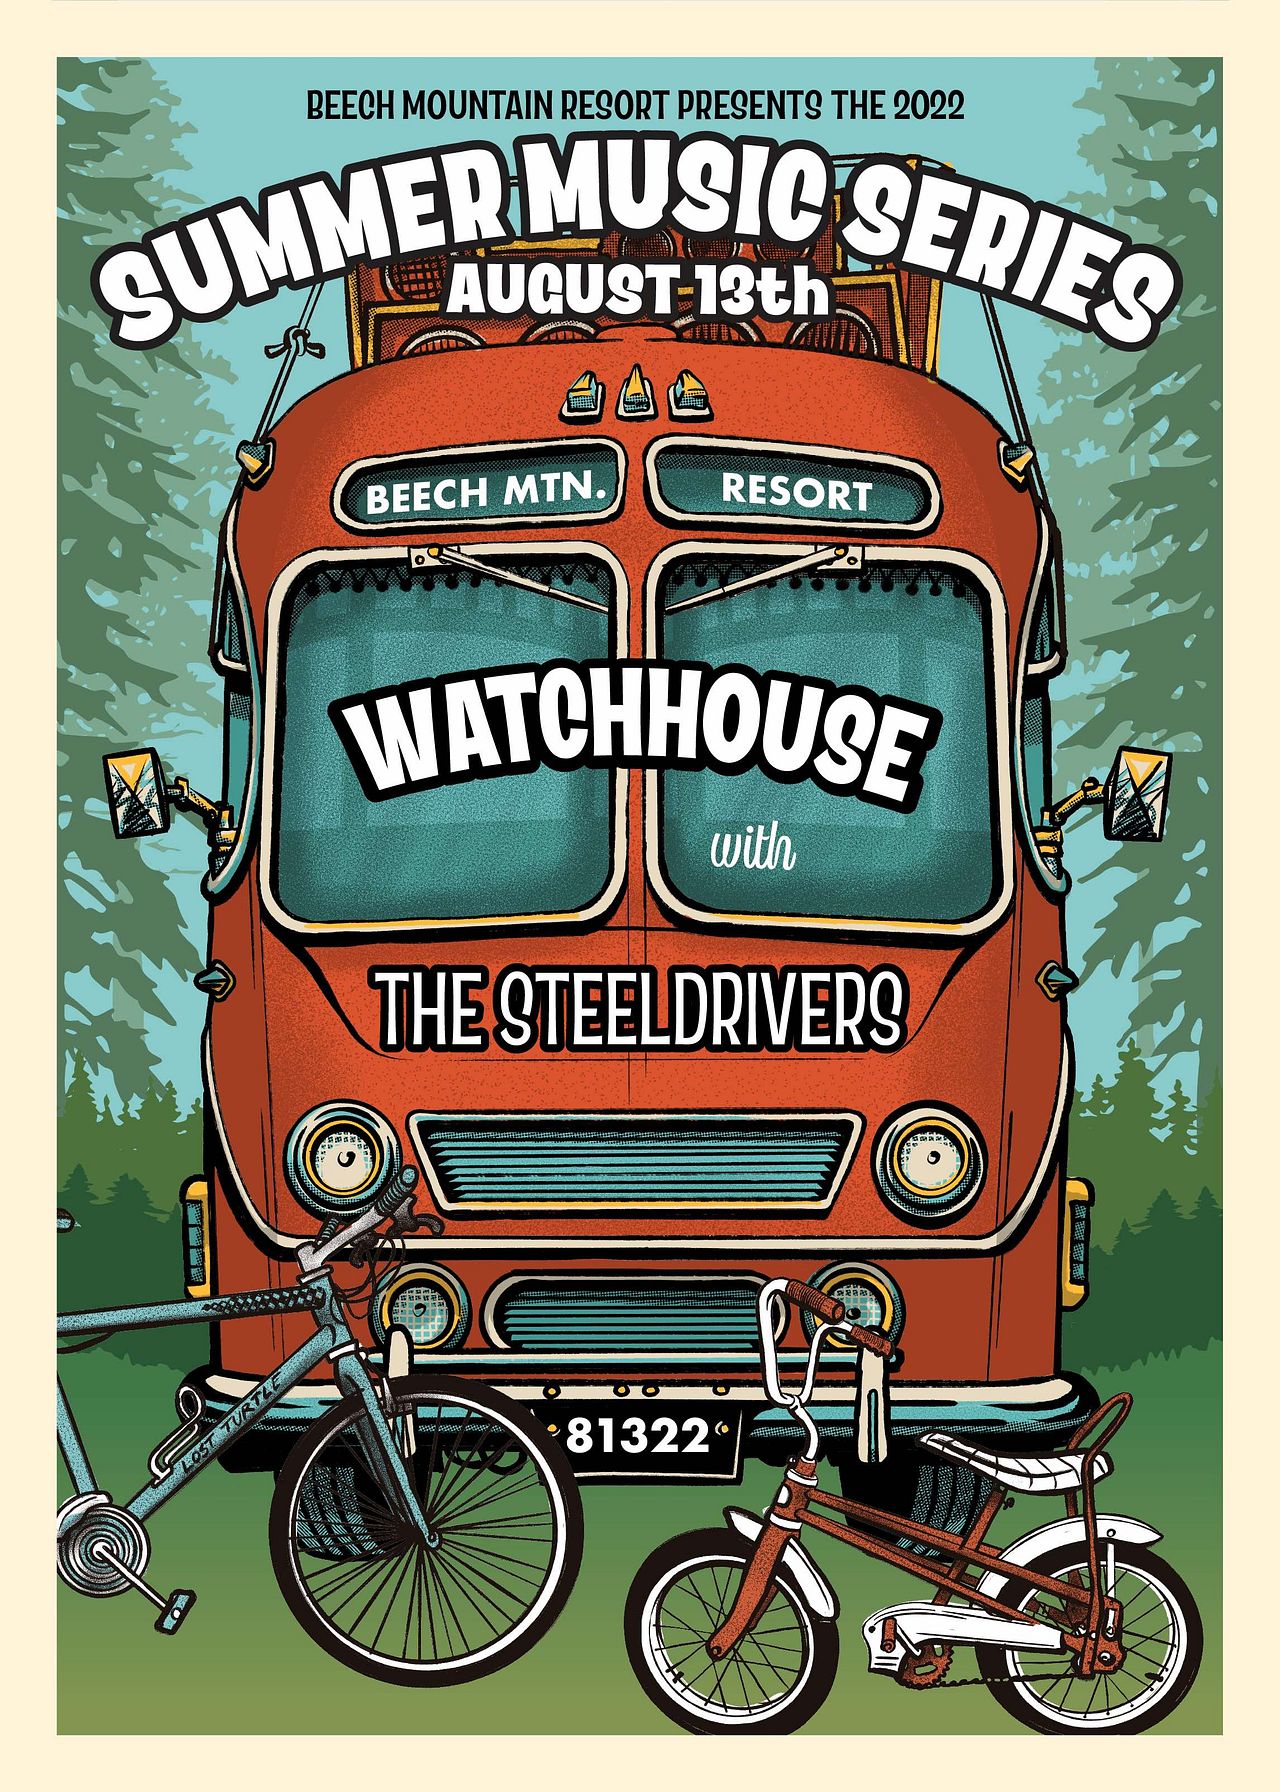 Watchhouse with The SteelDrivers Tickets at Beech Mountain Ski Resort